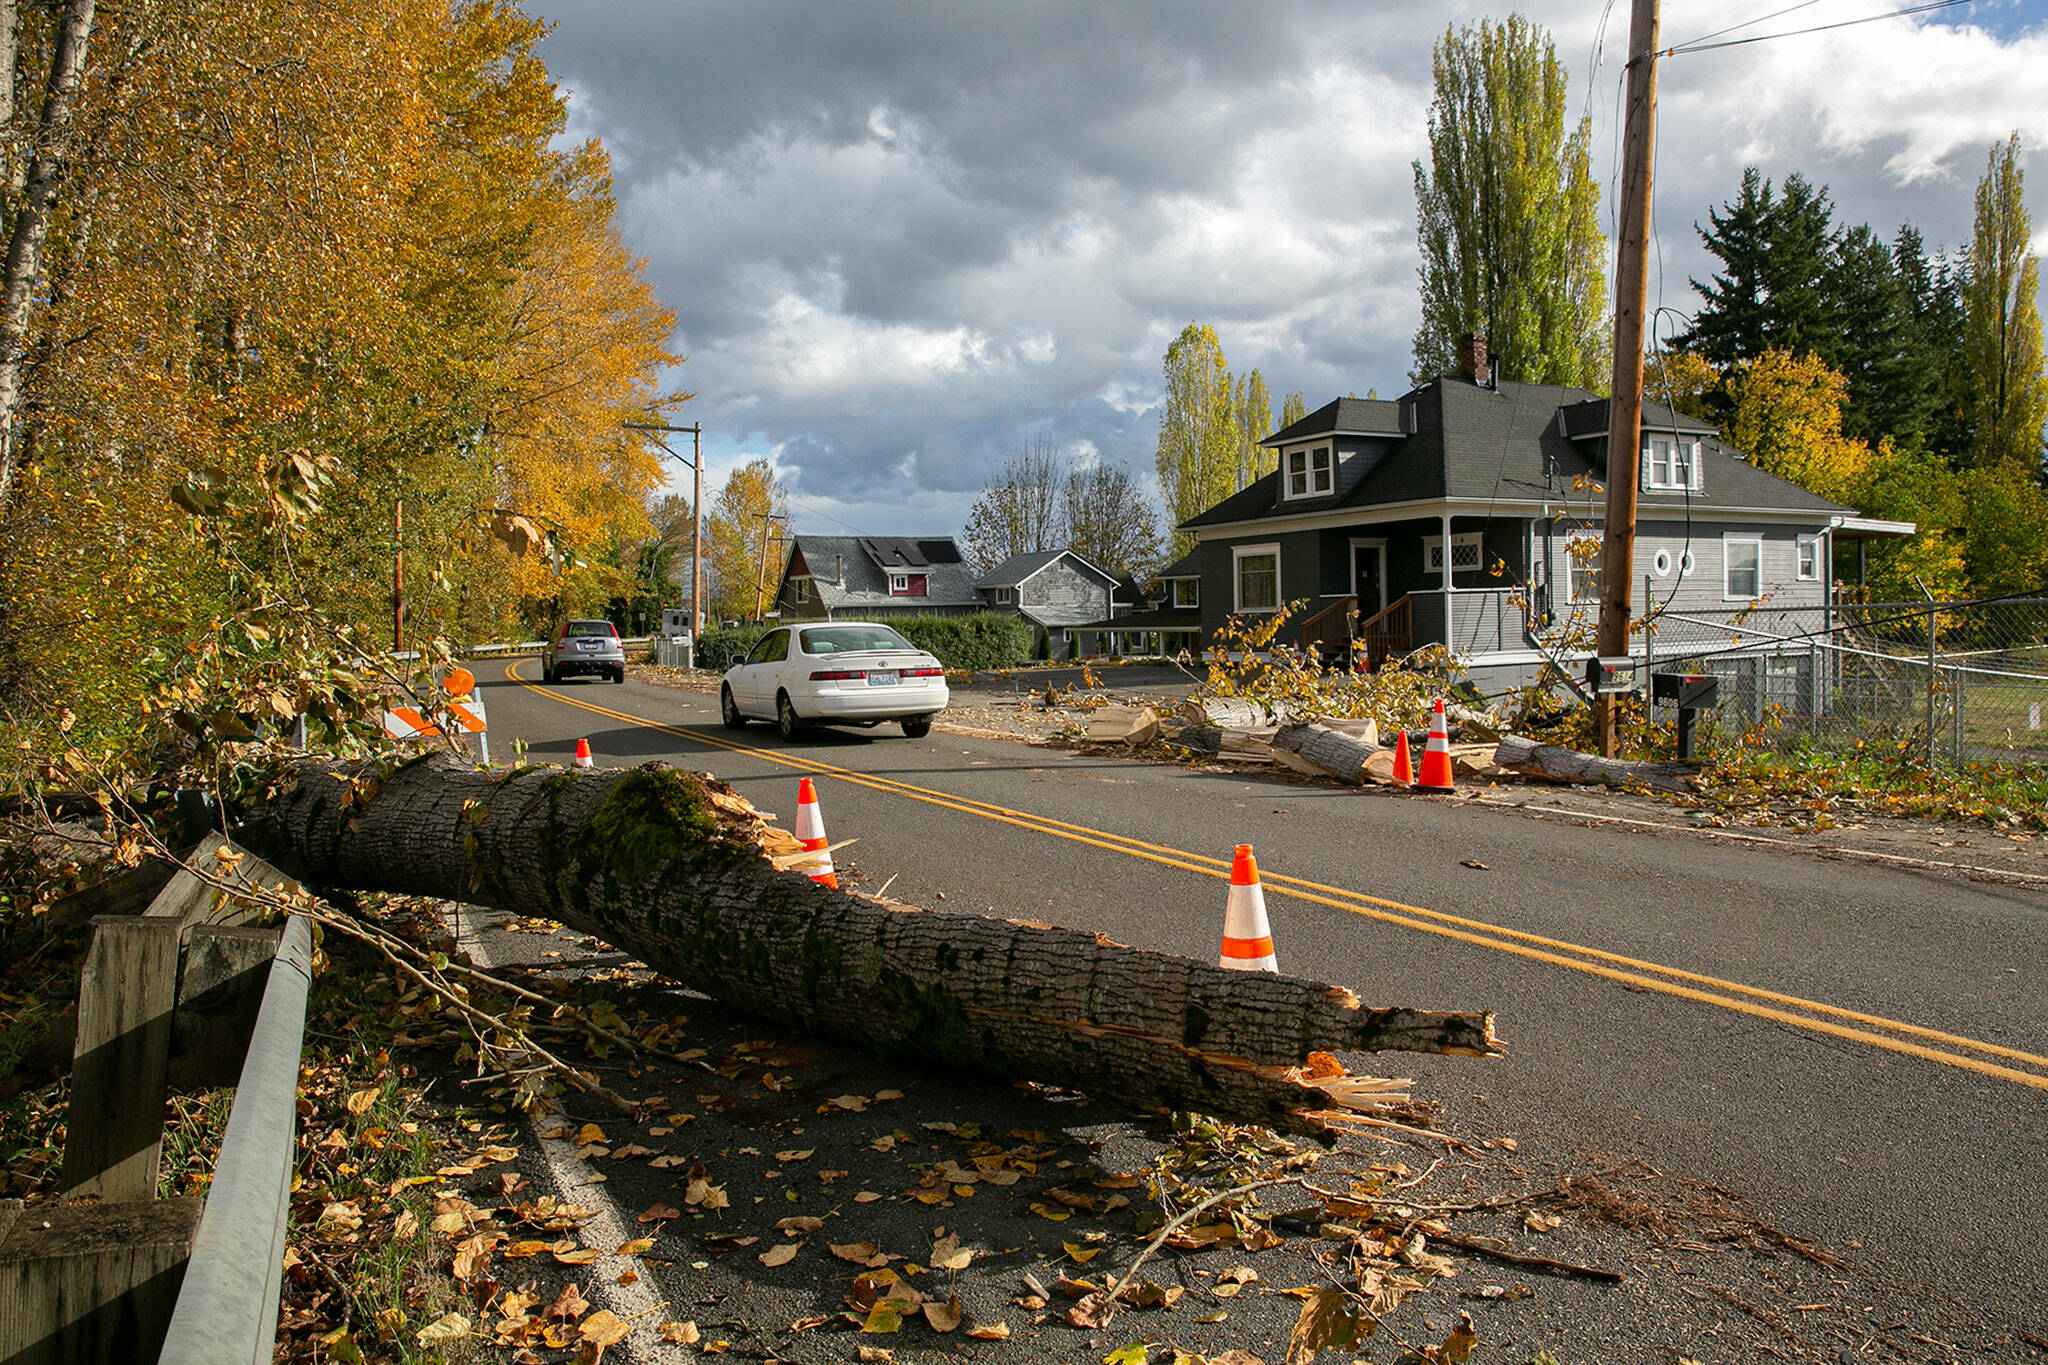 Vehicles pass between pieces of a large cottonwood that came down over Lowell Snohomish River Road, crushing a guardrail and taking out power lines, during an overnight wind storm Saturday, in Snohomish. (Ryan Berry / The Herald)